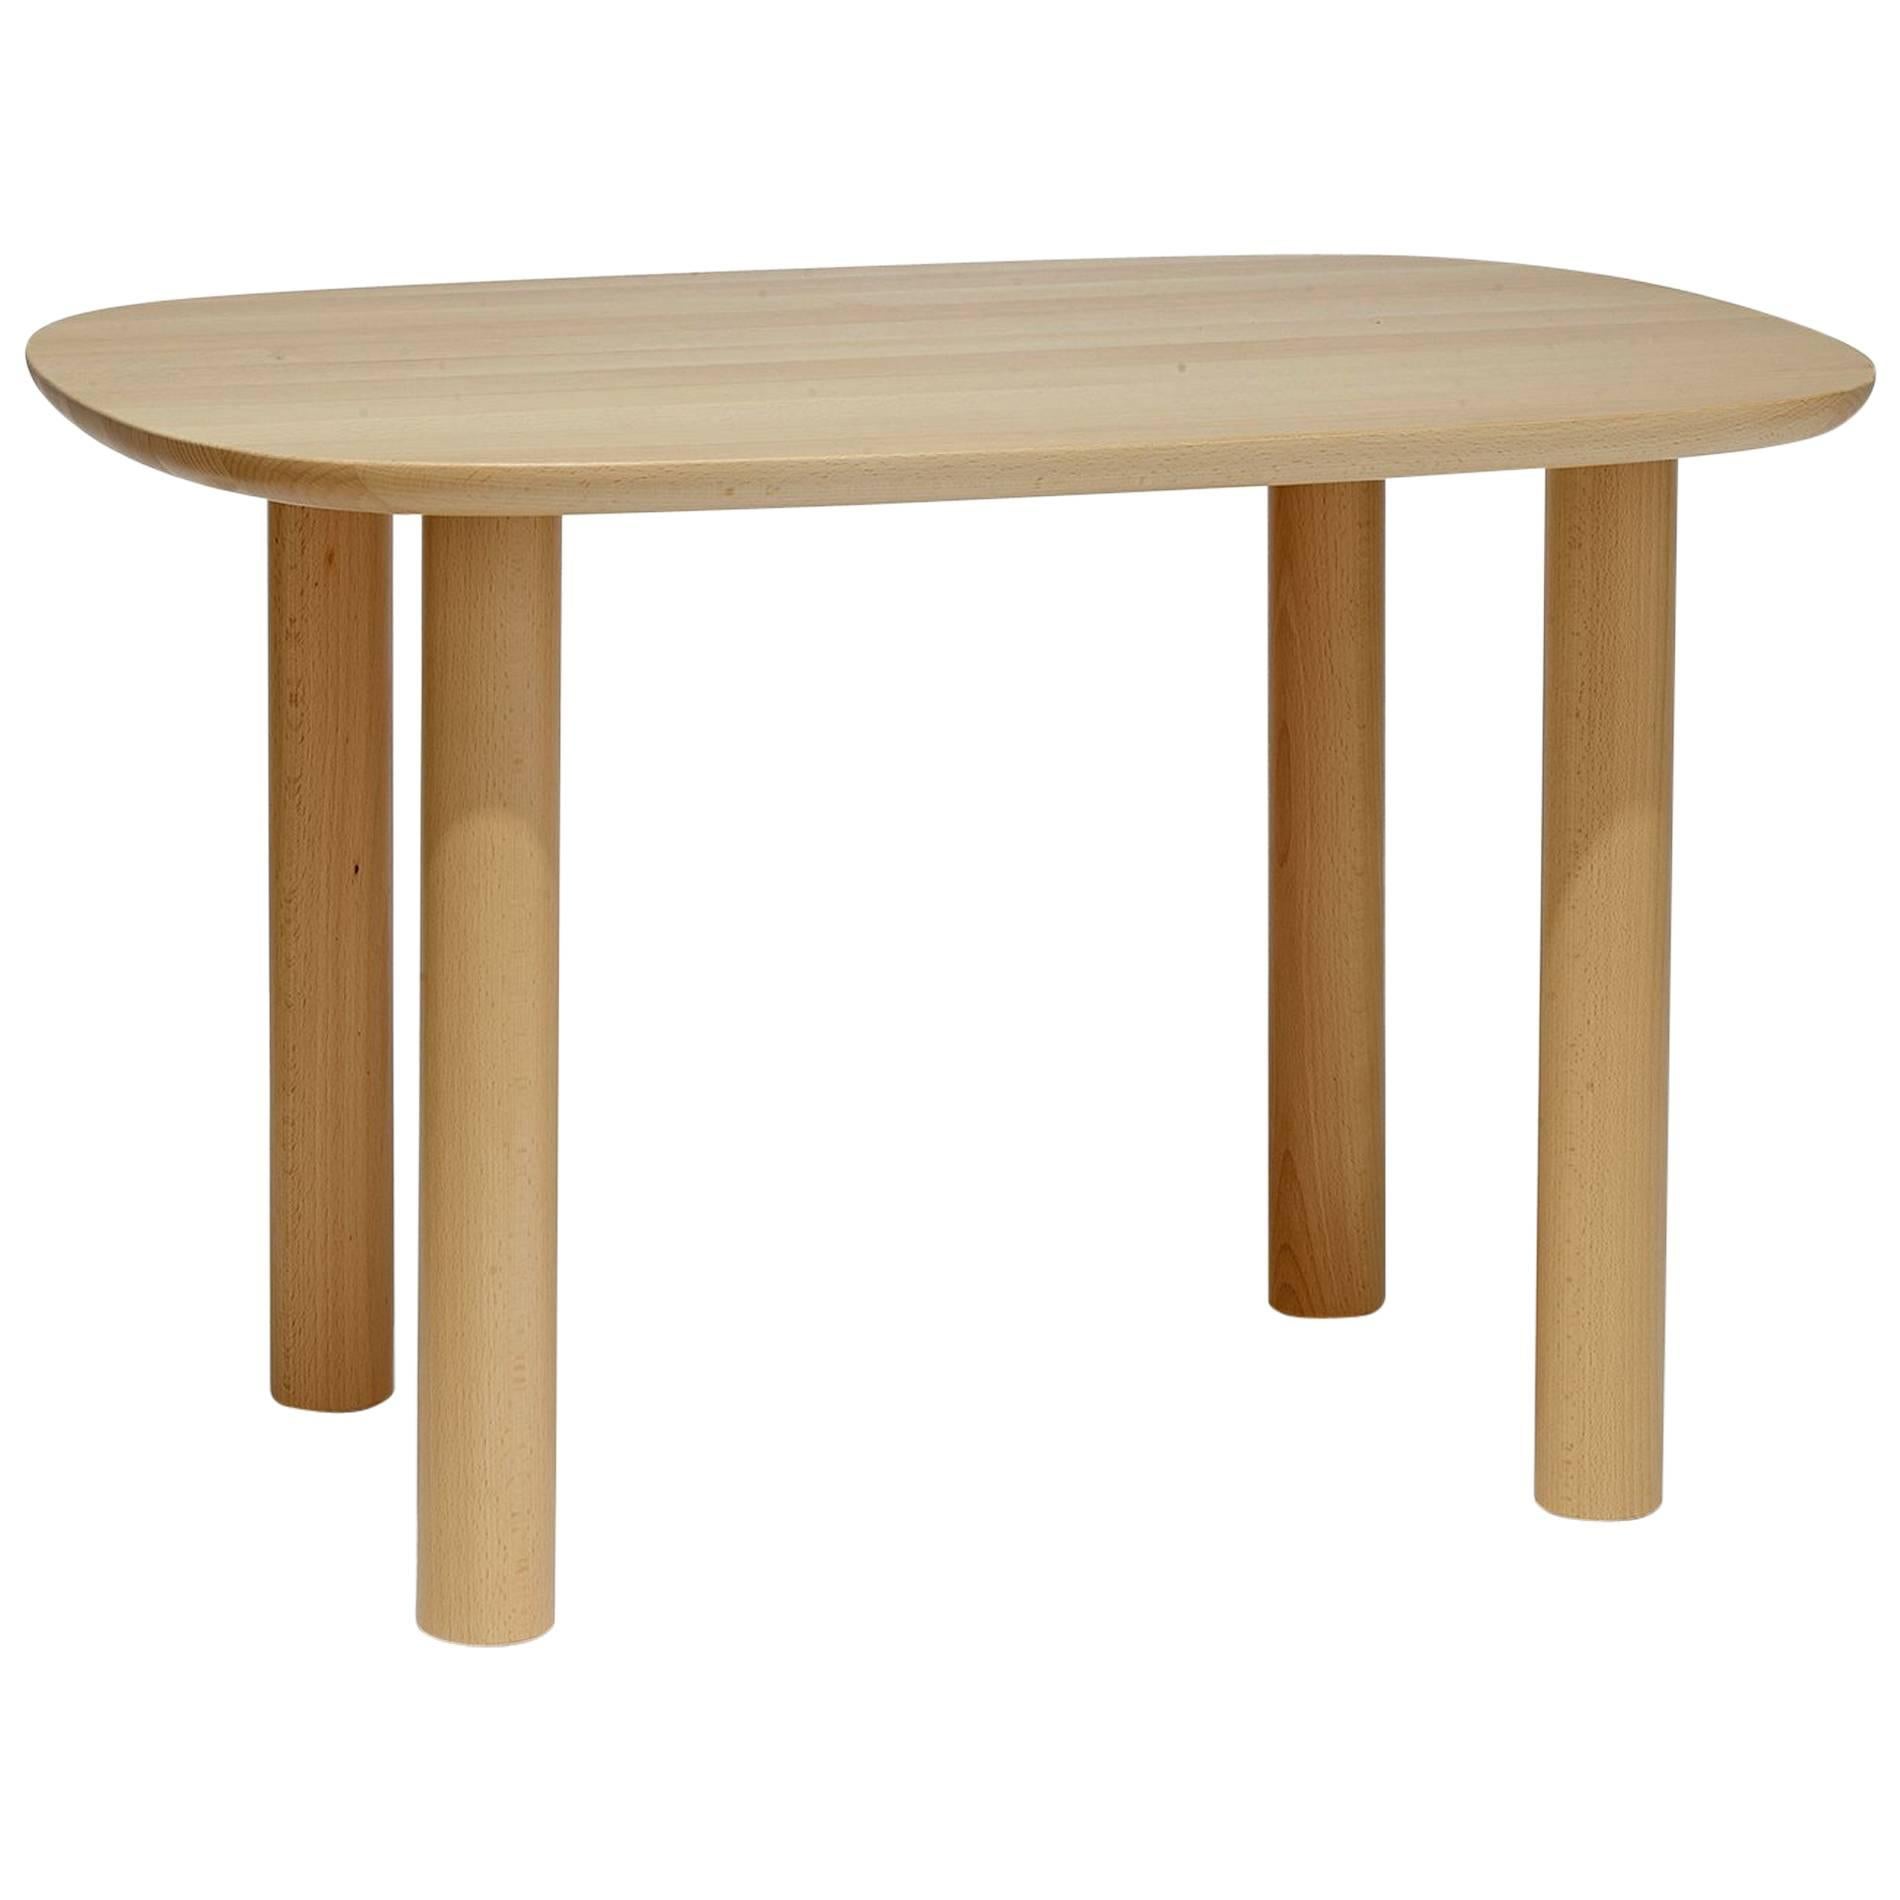 Elephant Child Table in Beech Wood by EO, Denmark For Sale